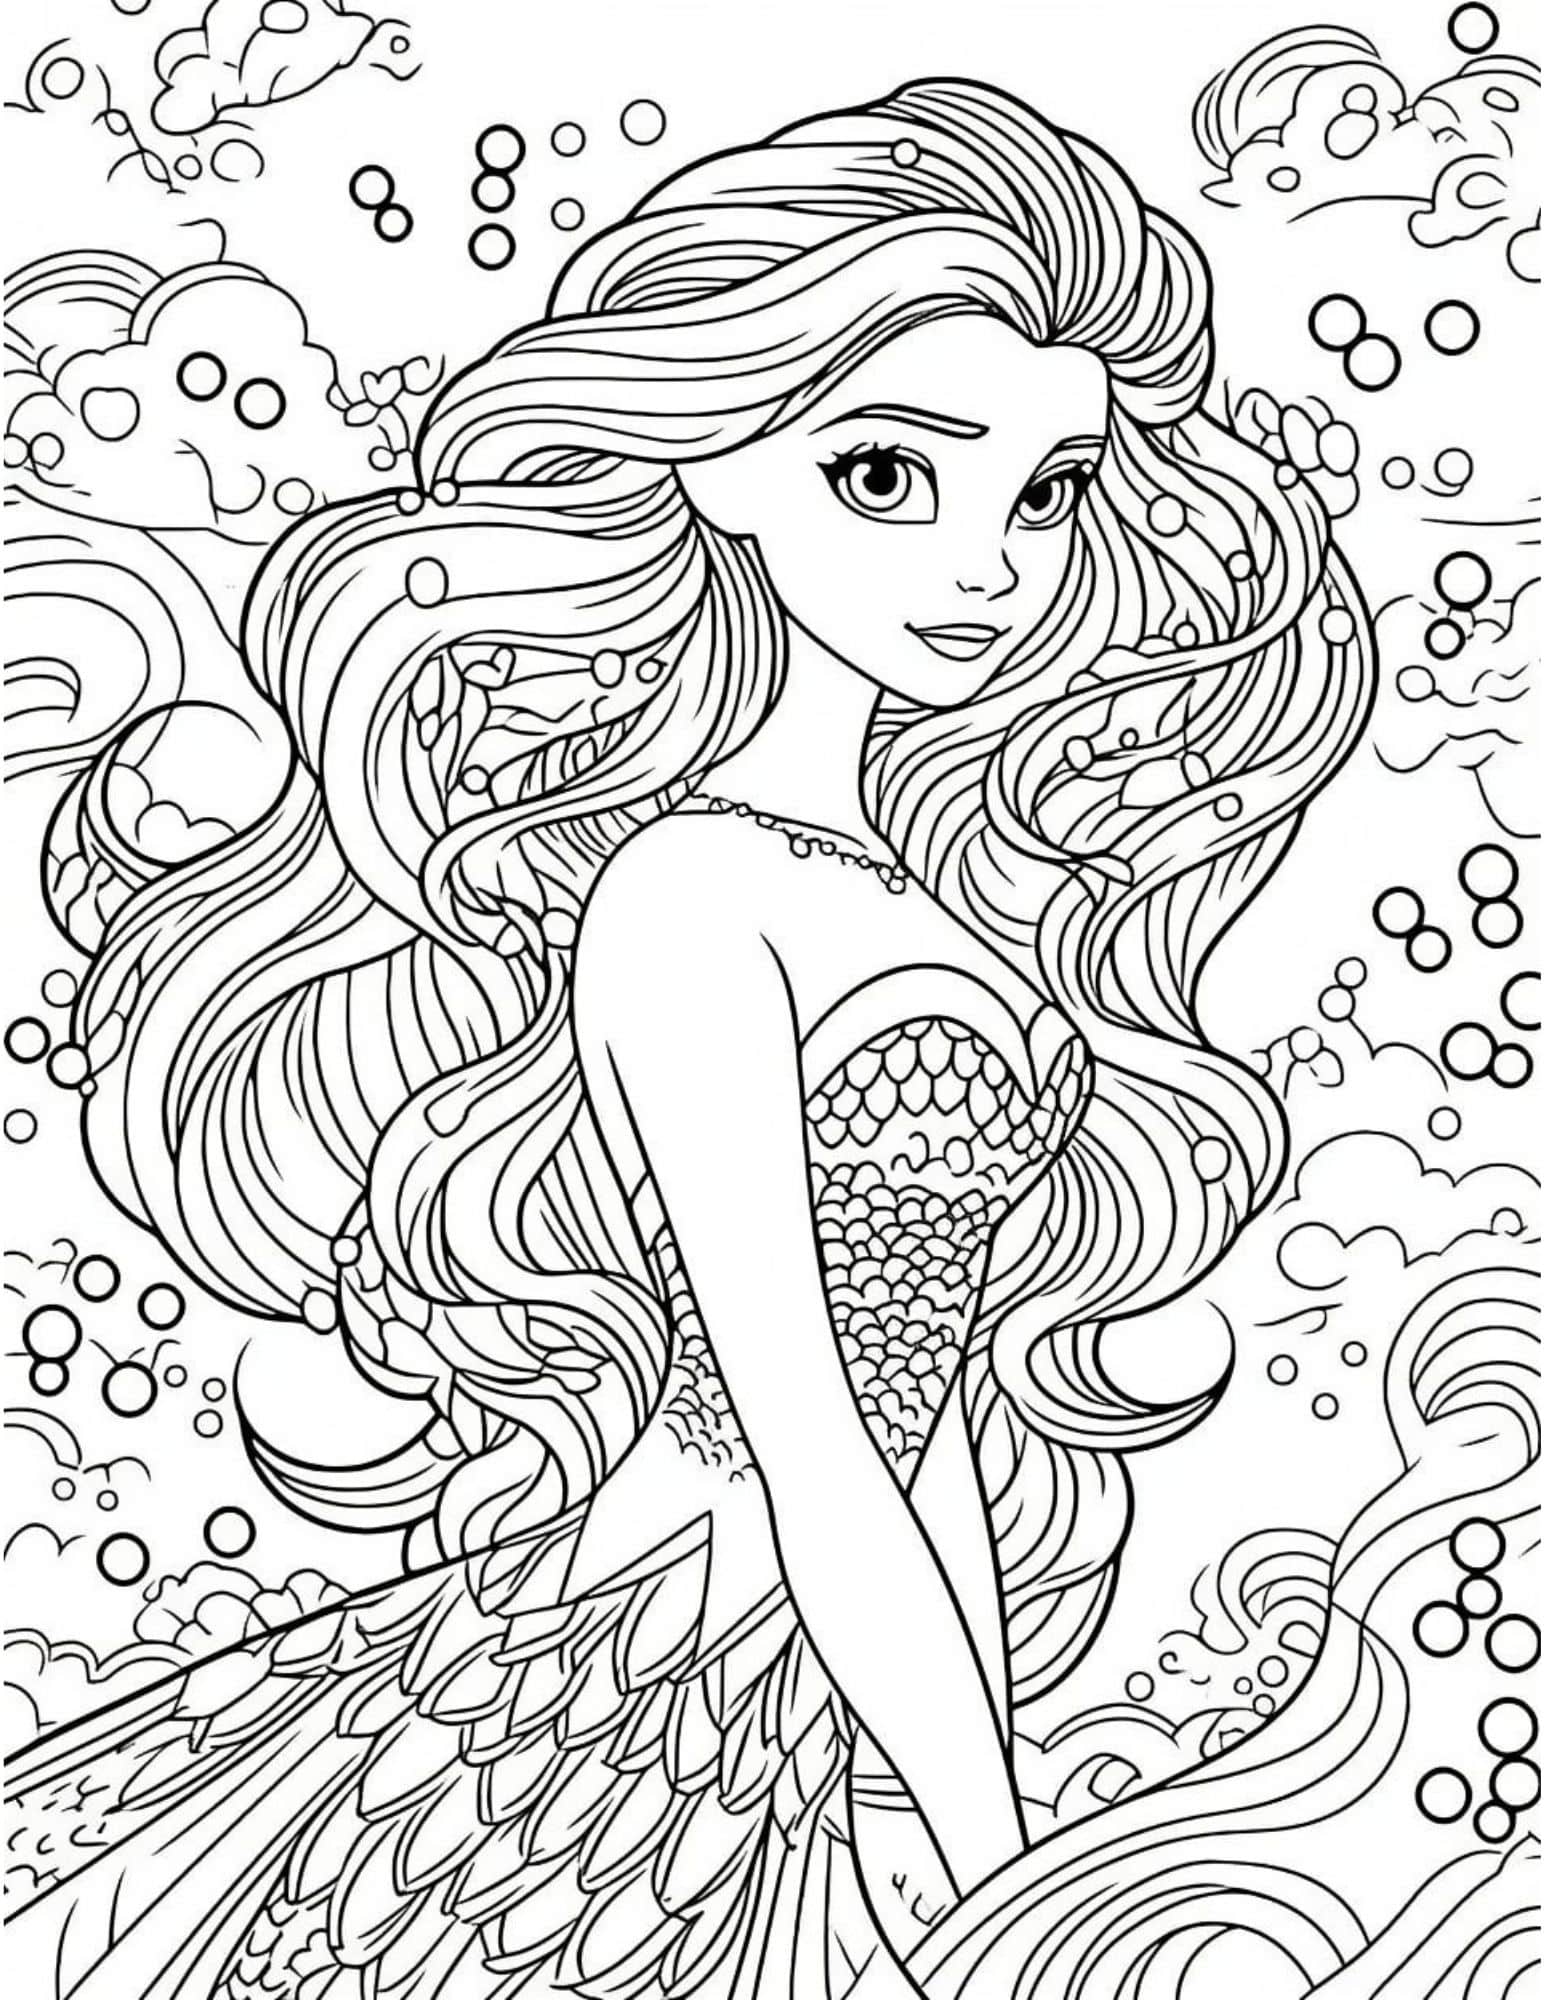 44 Mermaid Coloring Pages For Kids And Adults - Our Mindful Life